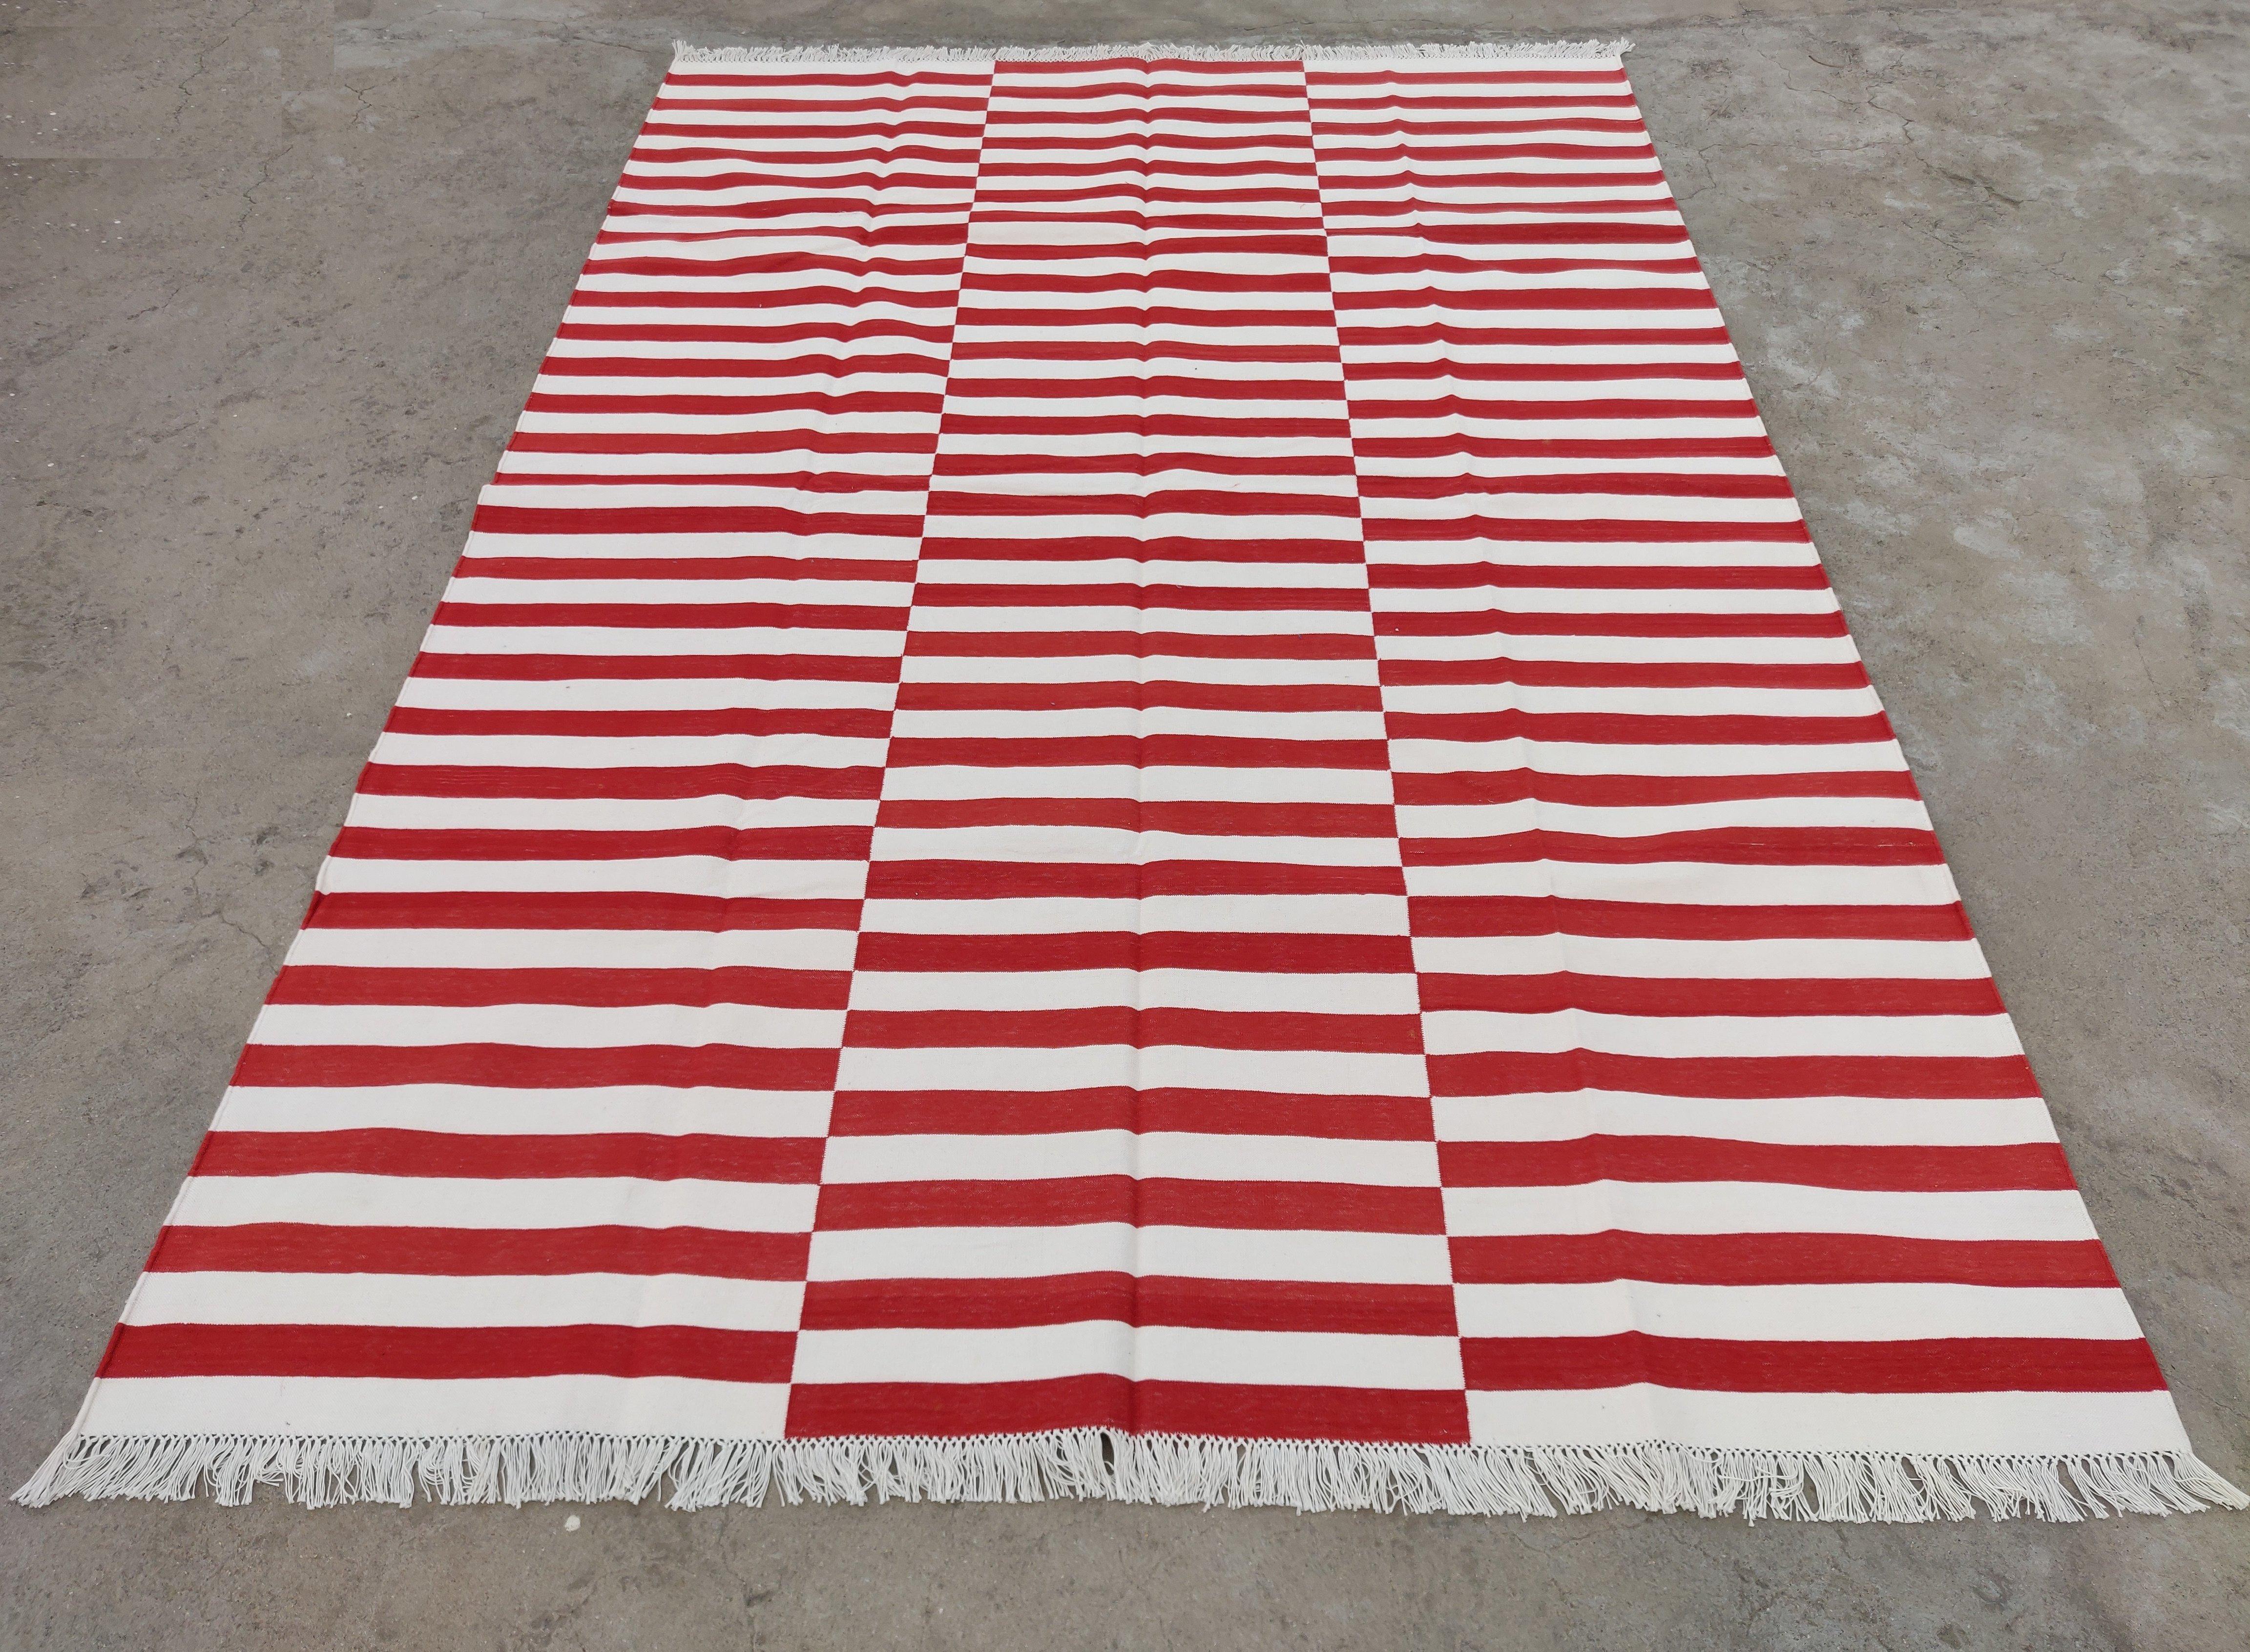 Handmade Cotton Area Flat Weave Rug, 6x9 Red And White Striped Indian Dhurrie In New Condition For Sale In Jaipur, IN